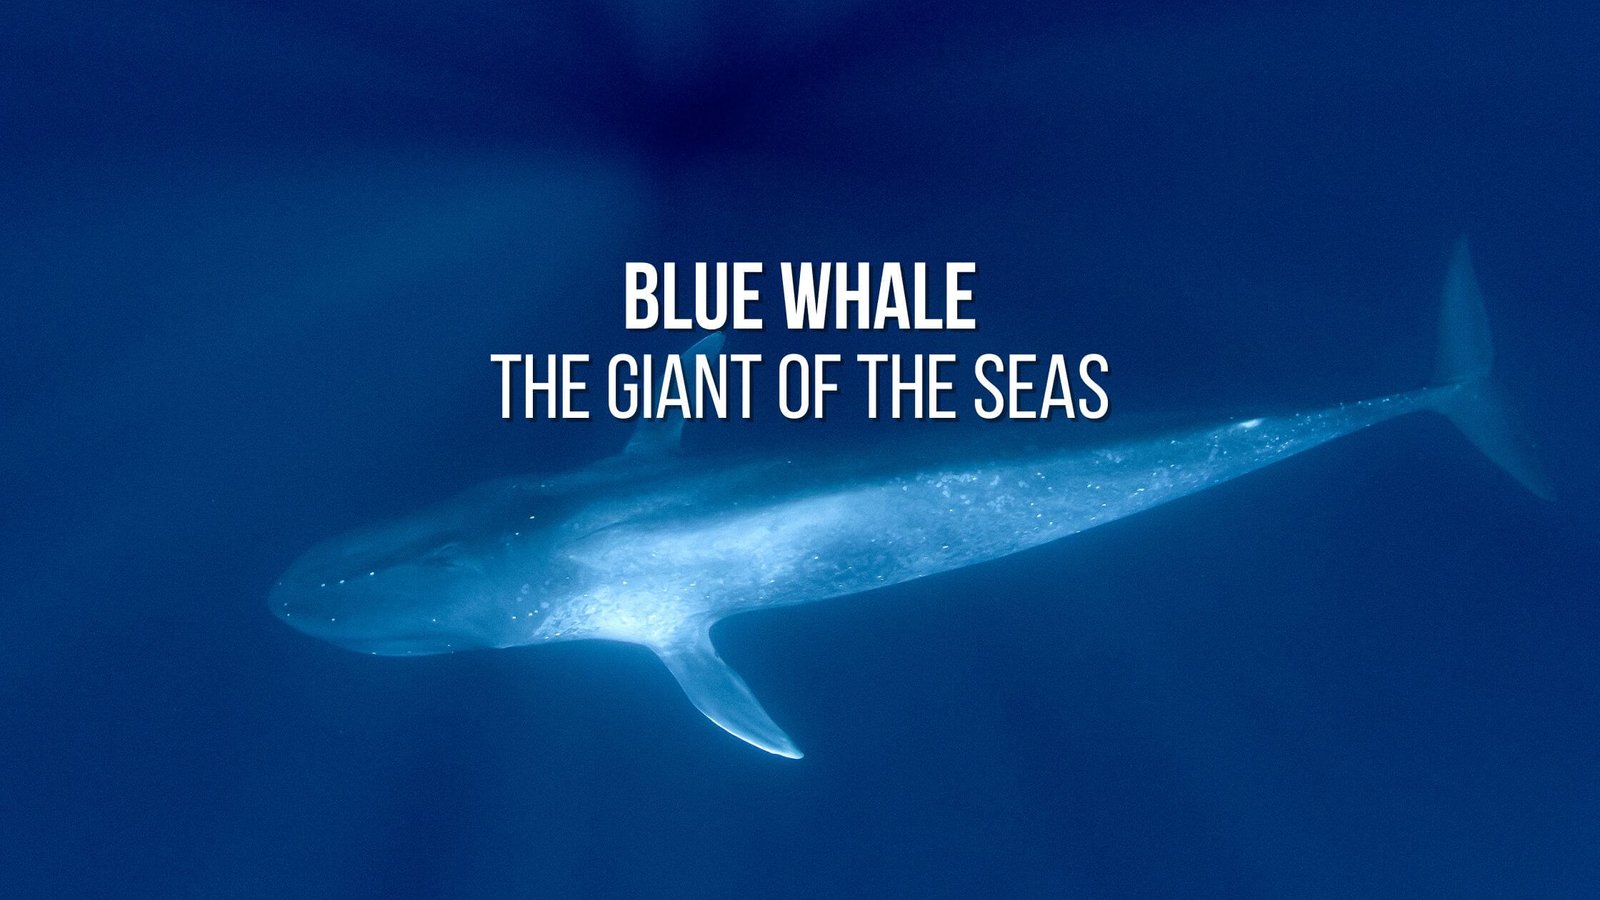 Learn all about the blue whale: the giant of the seas - Proto Animal